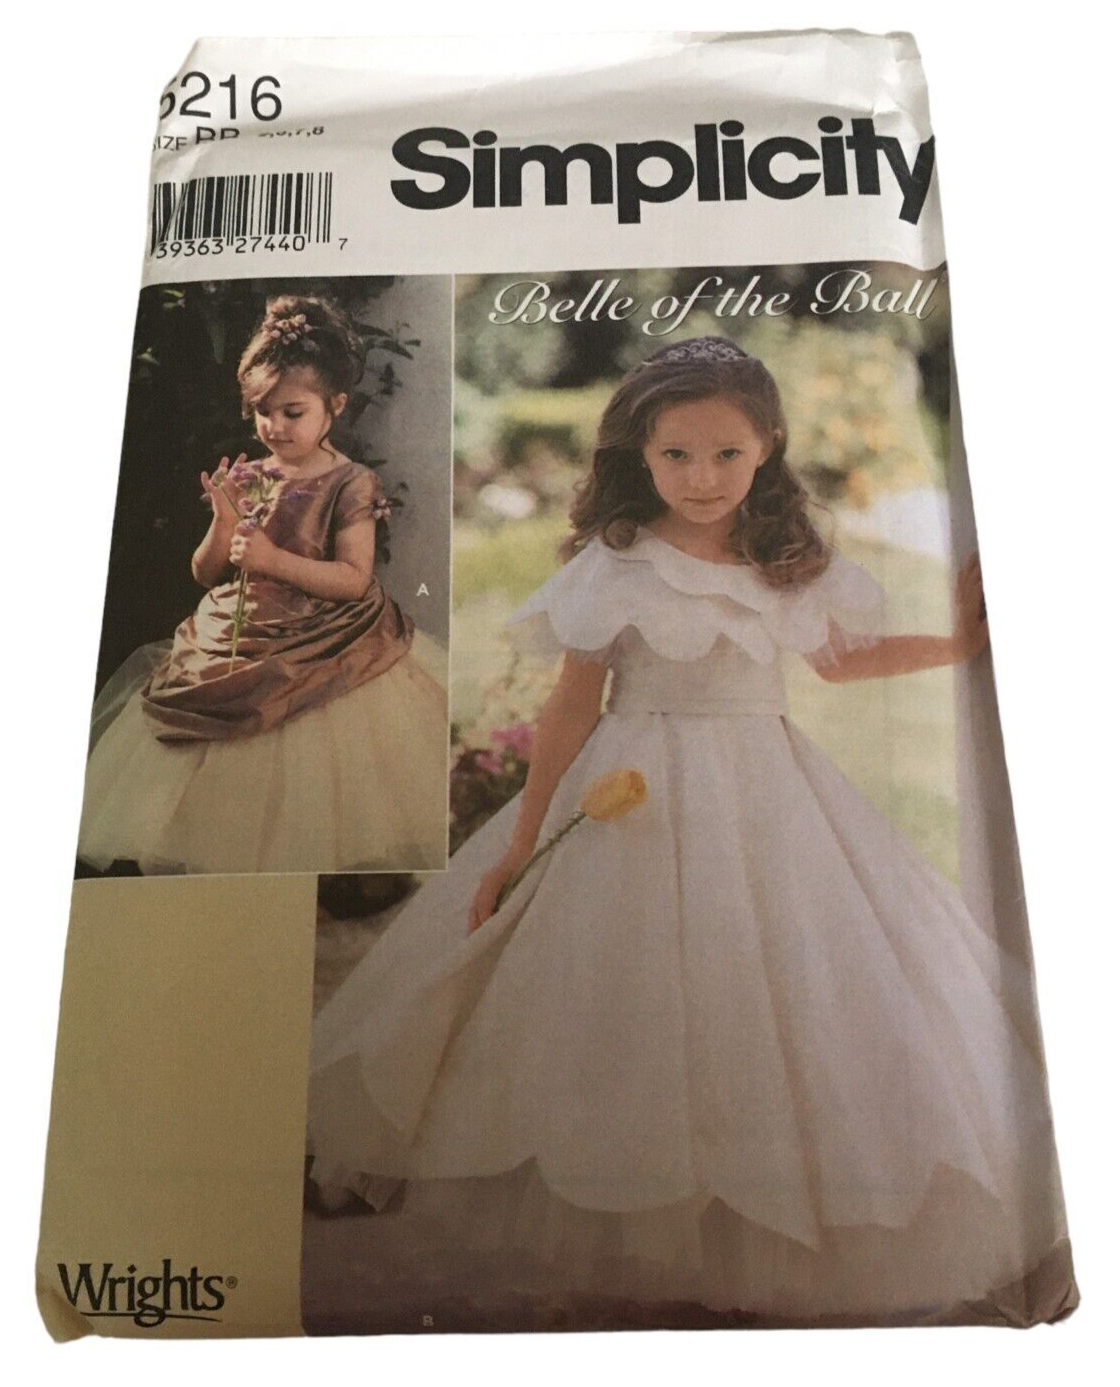 Primary image for Simplicity Sewing Pattern 5216 Belle of the Ball Fancy Dress Wedding Girl 5-8 UC